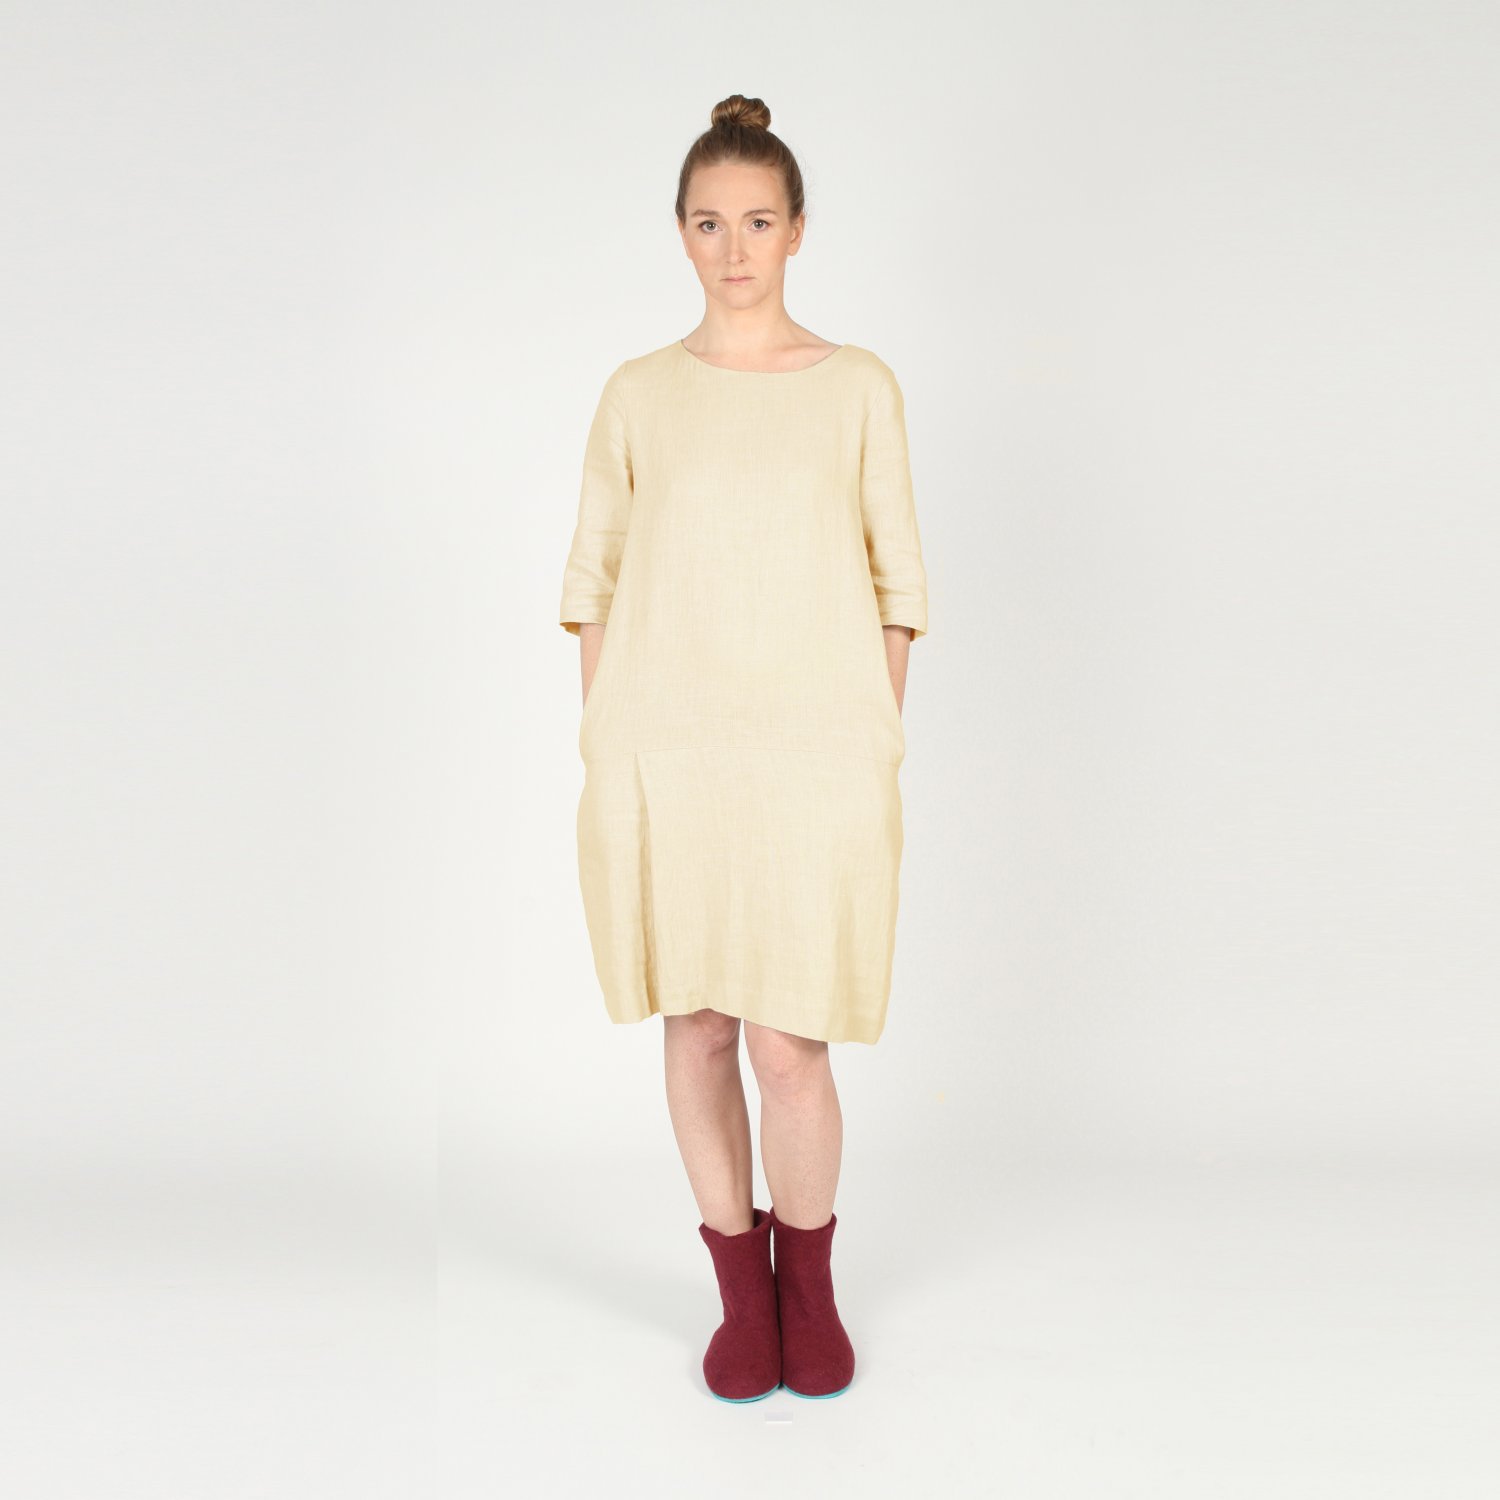 Mustard Sand Washed Linen Dress. Side Pockets, Pleat and Length of ...